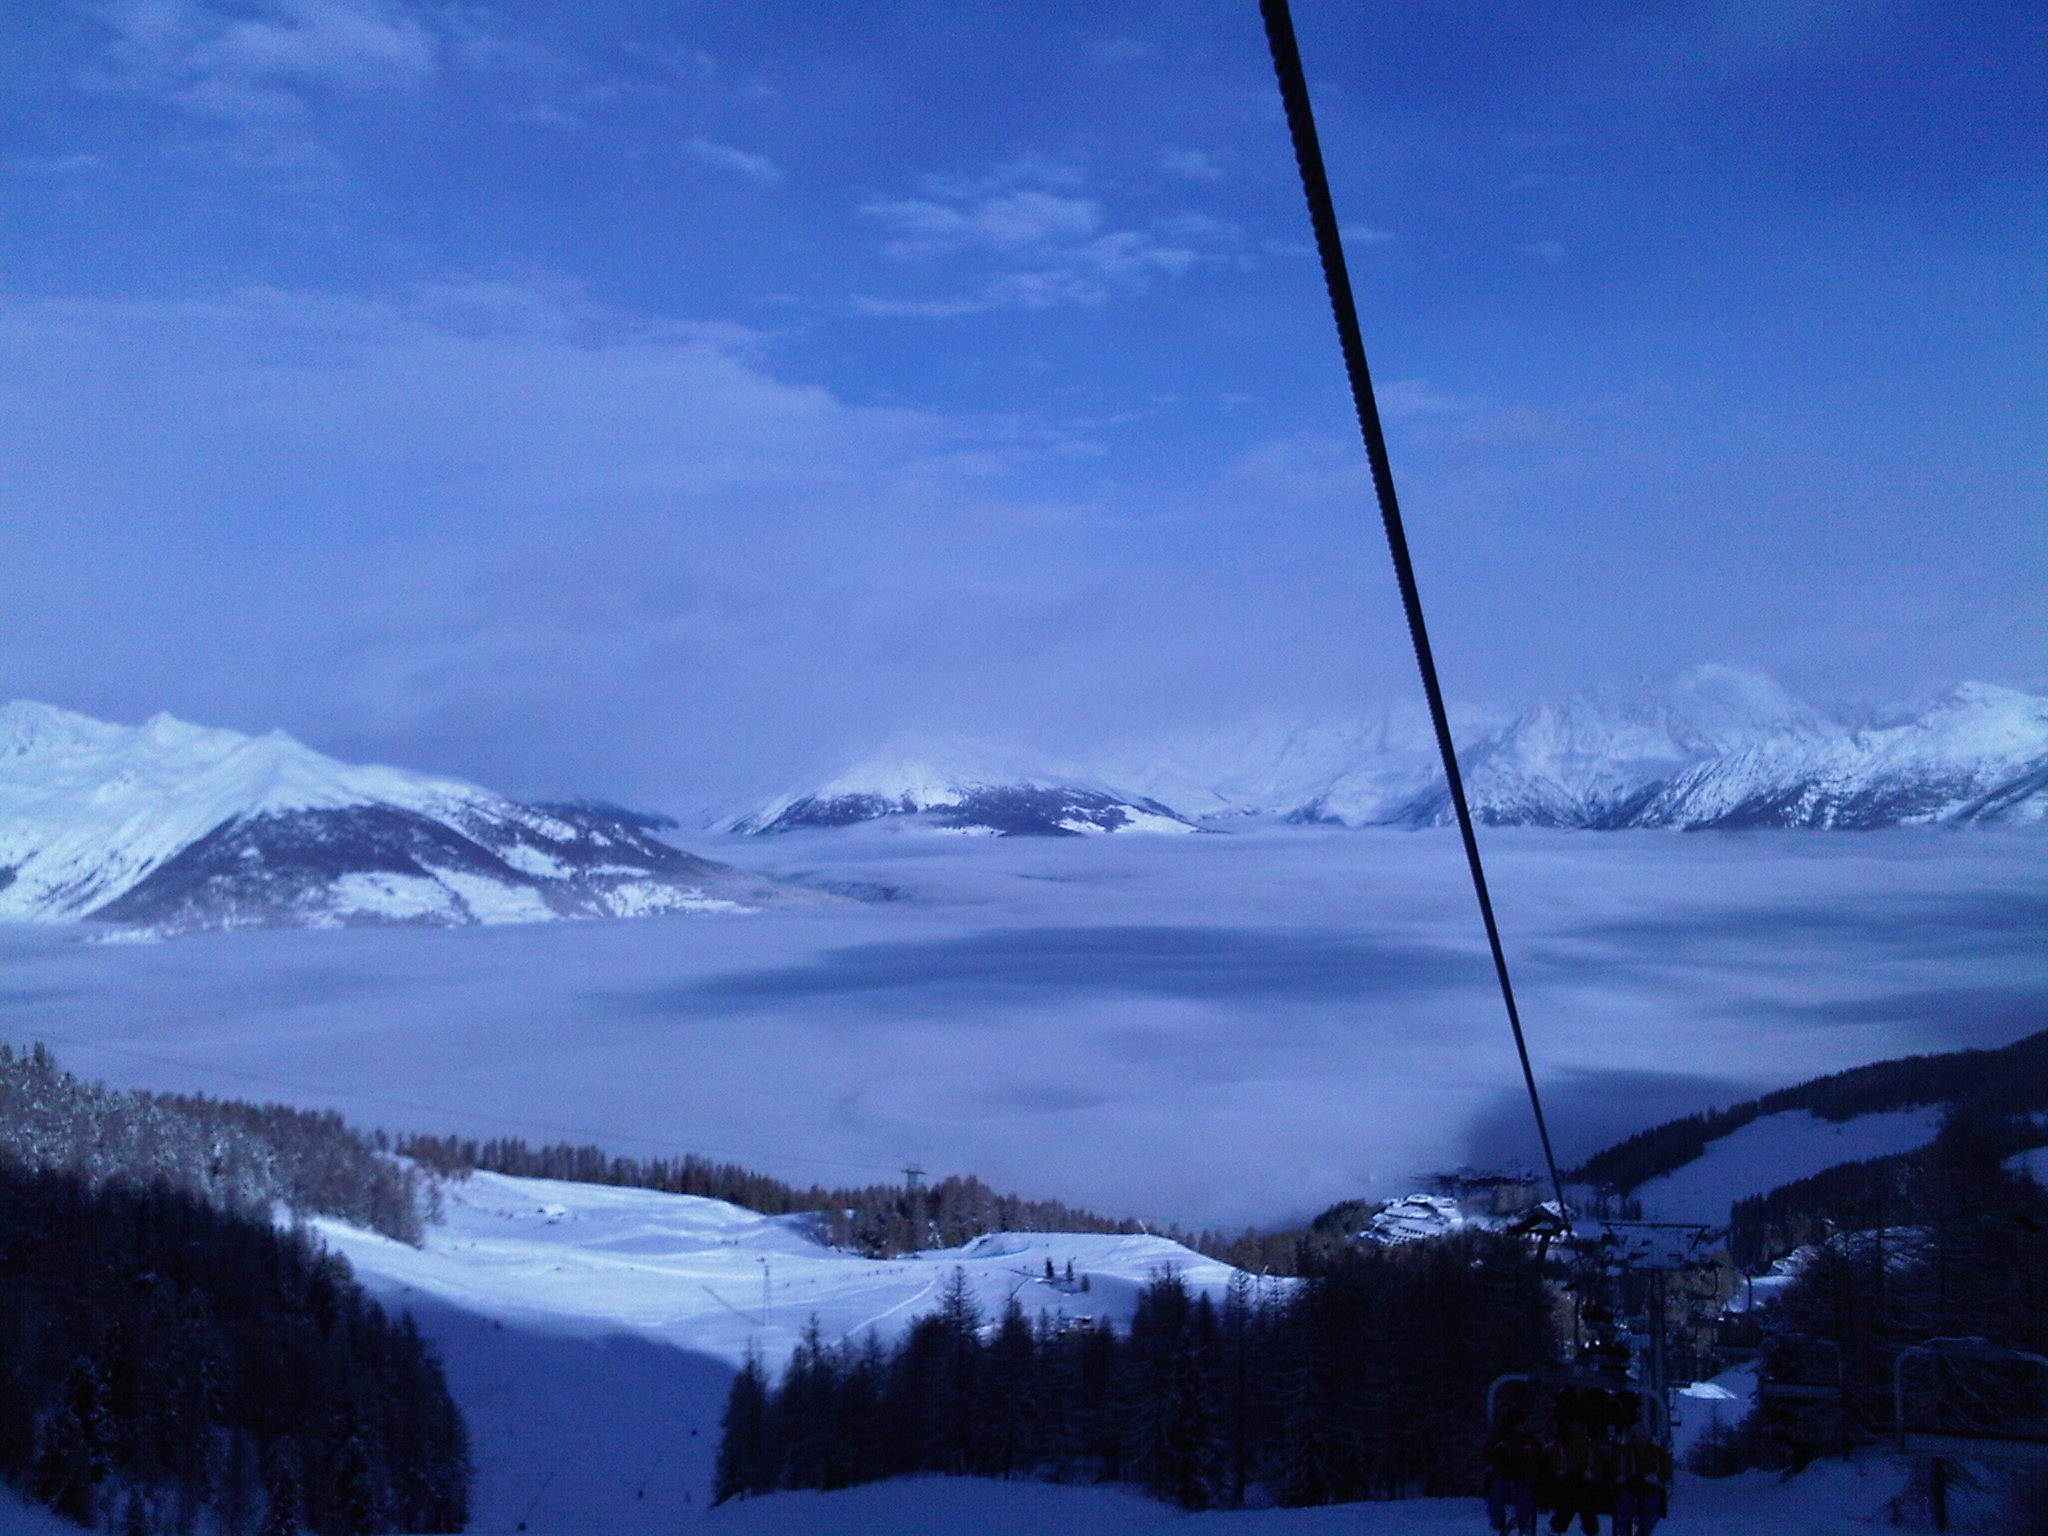 Another Fine day in Pila